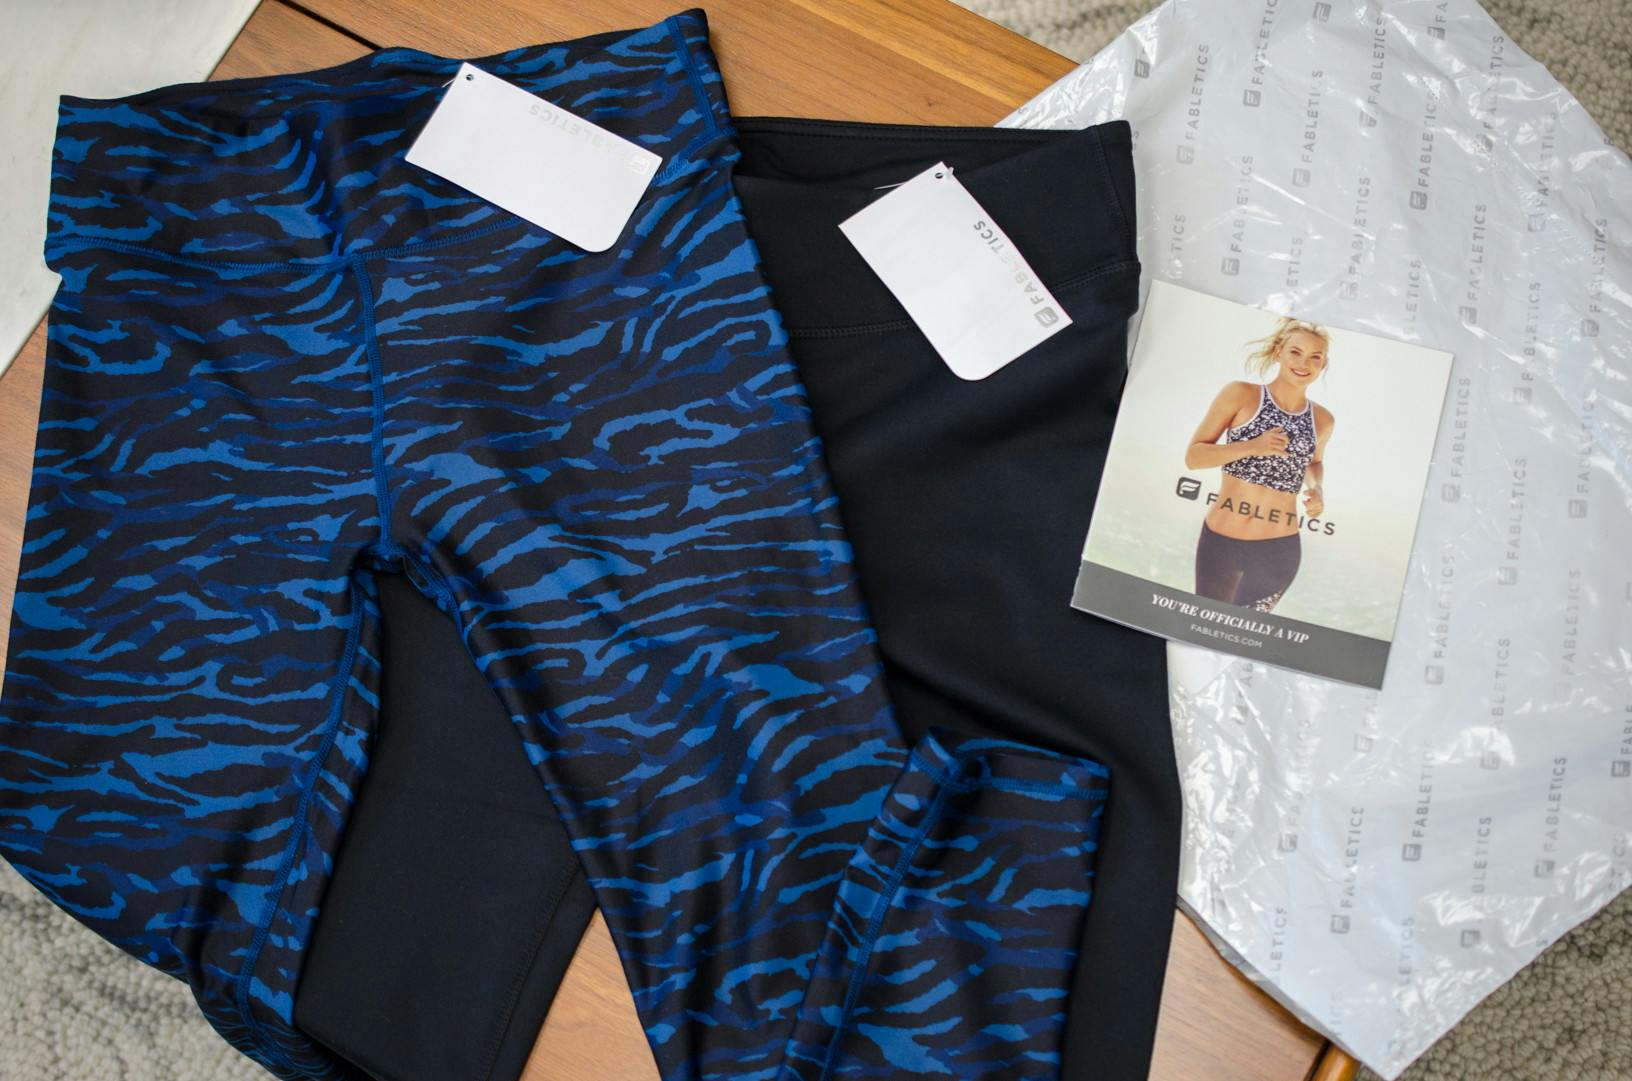 New Fabletics VIP Offer: Get 2 Pairs of Leggings for $24 (Reg. $140) - The  Krazy Coupon Lady